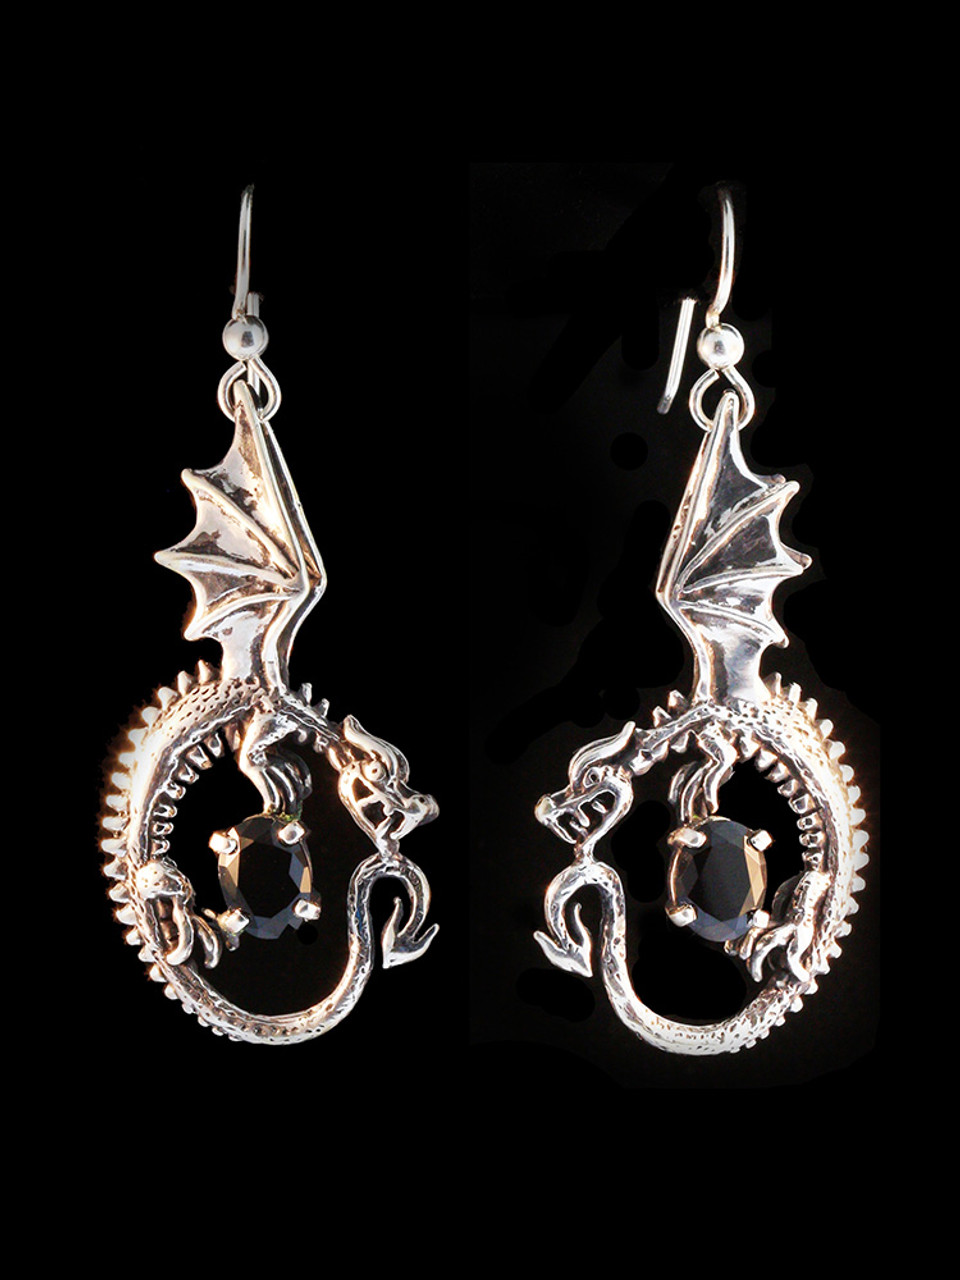 Oracle Dragon Earrings with Gemstones - Silver - Marty Magic Store